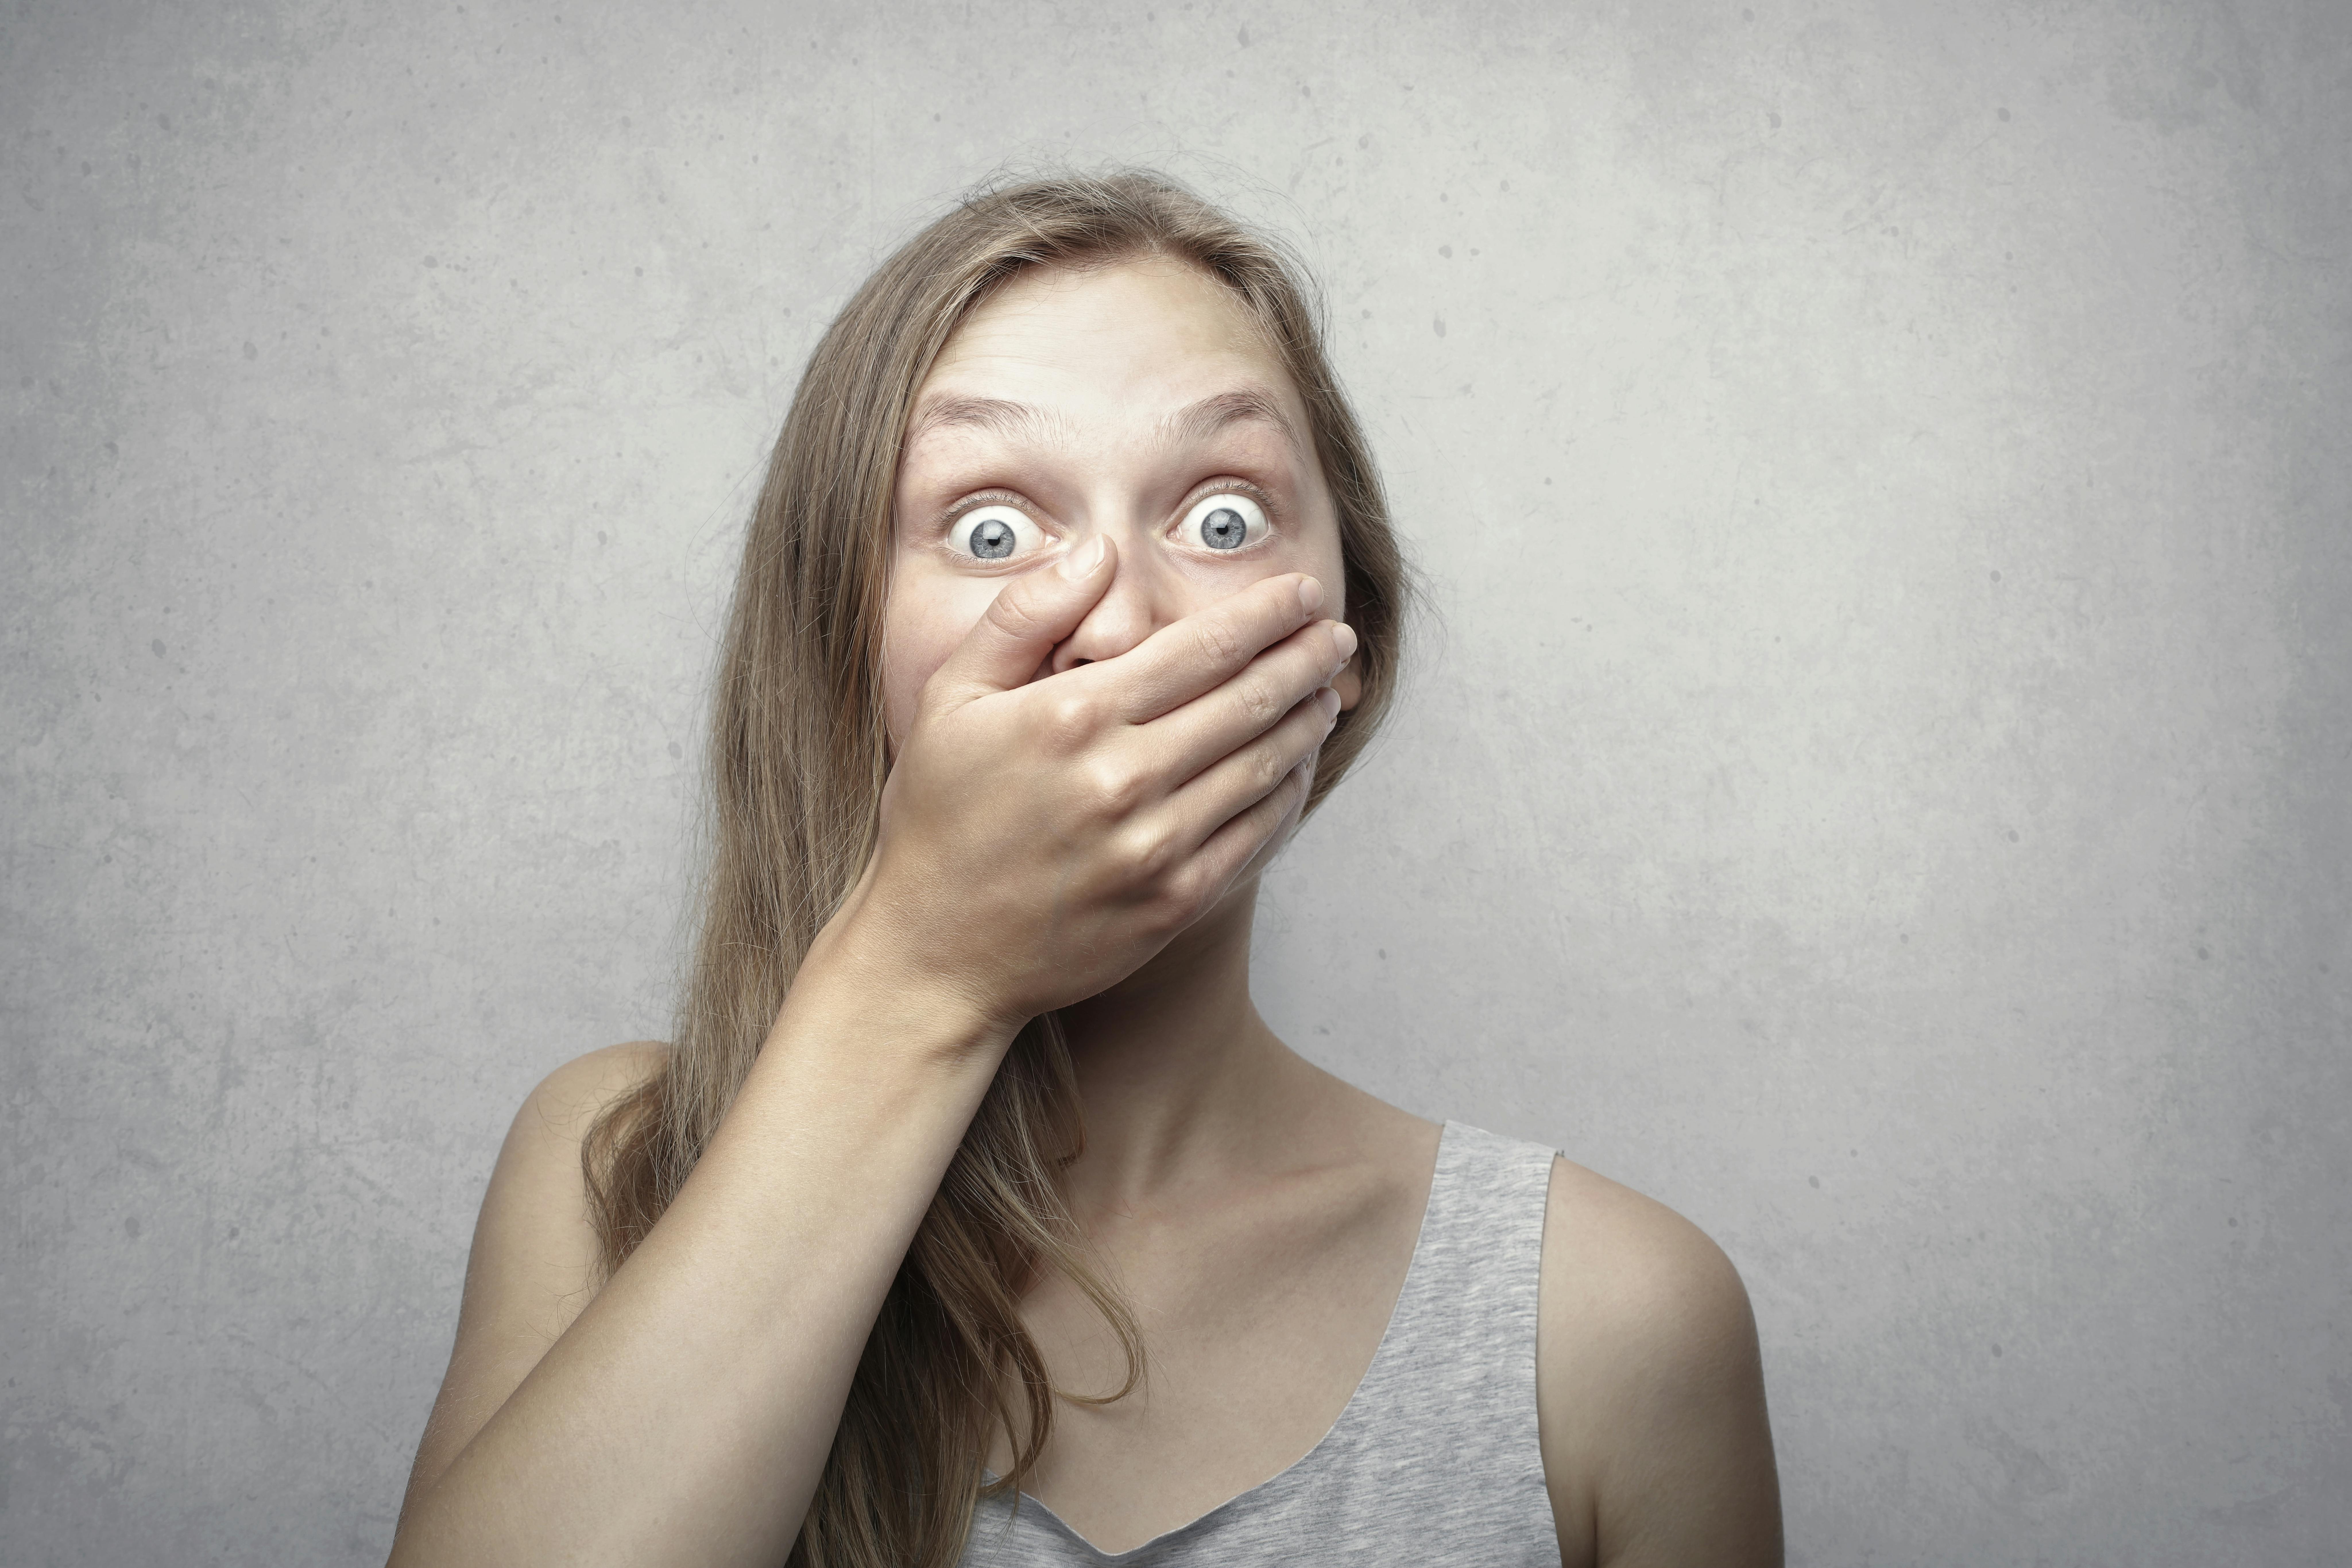 A woman covering her mouth while looking shocked | Source: Pexels